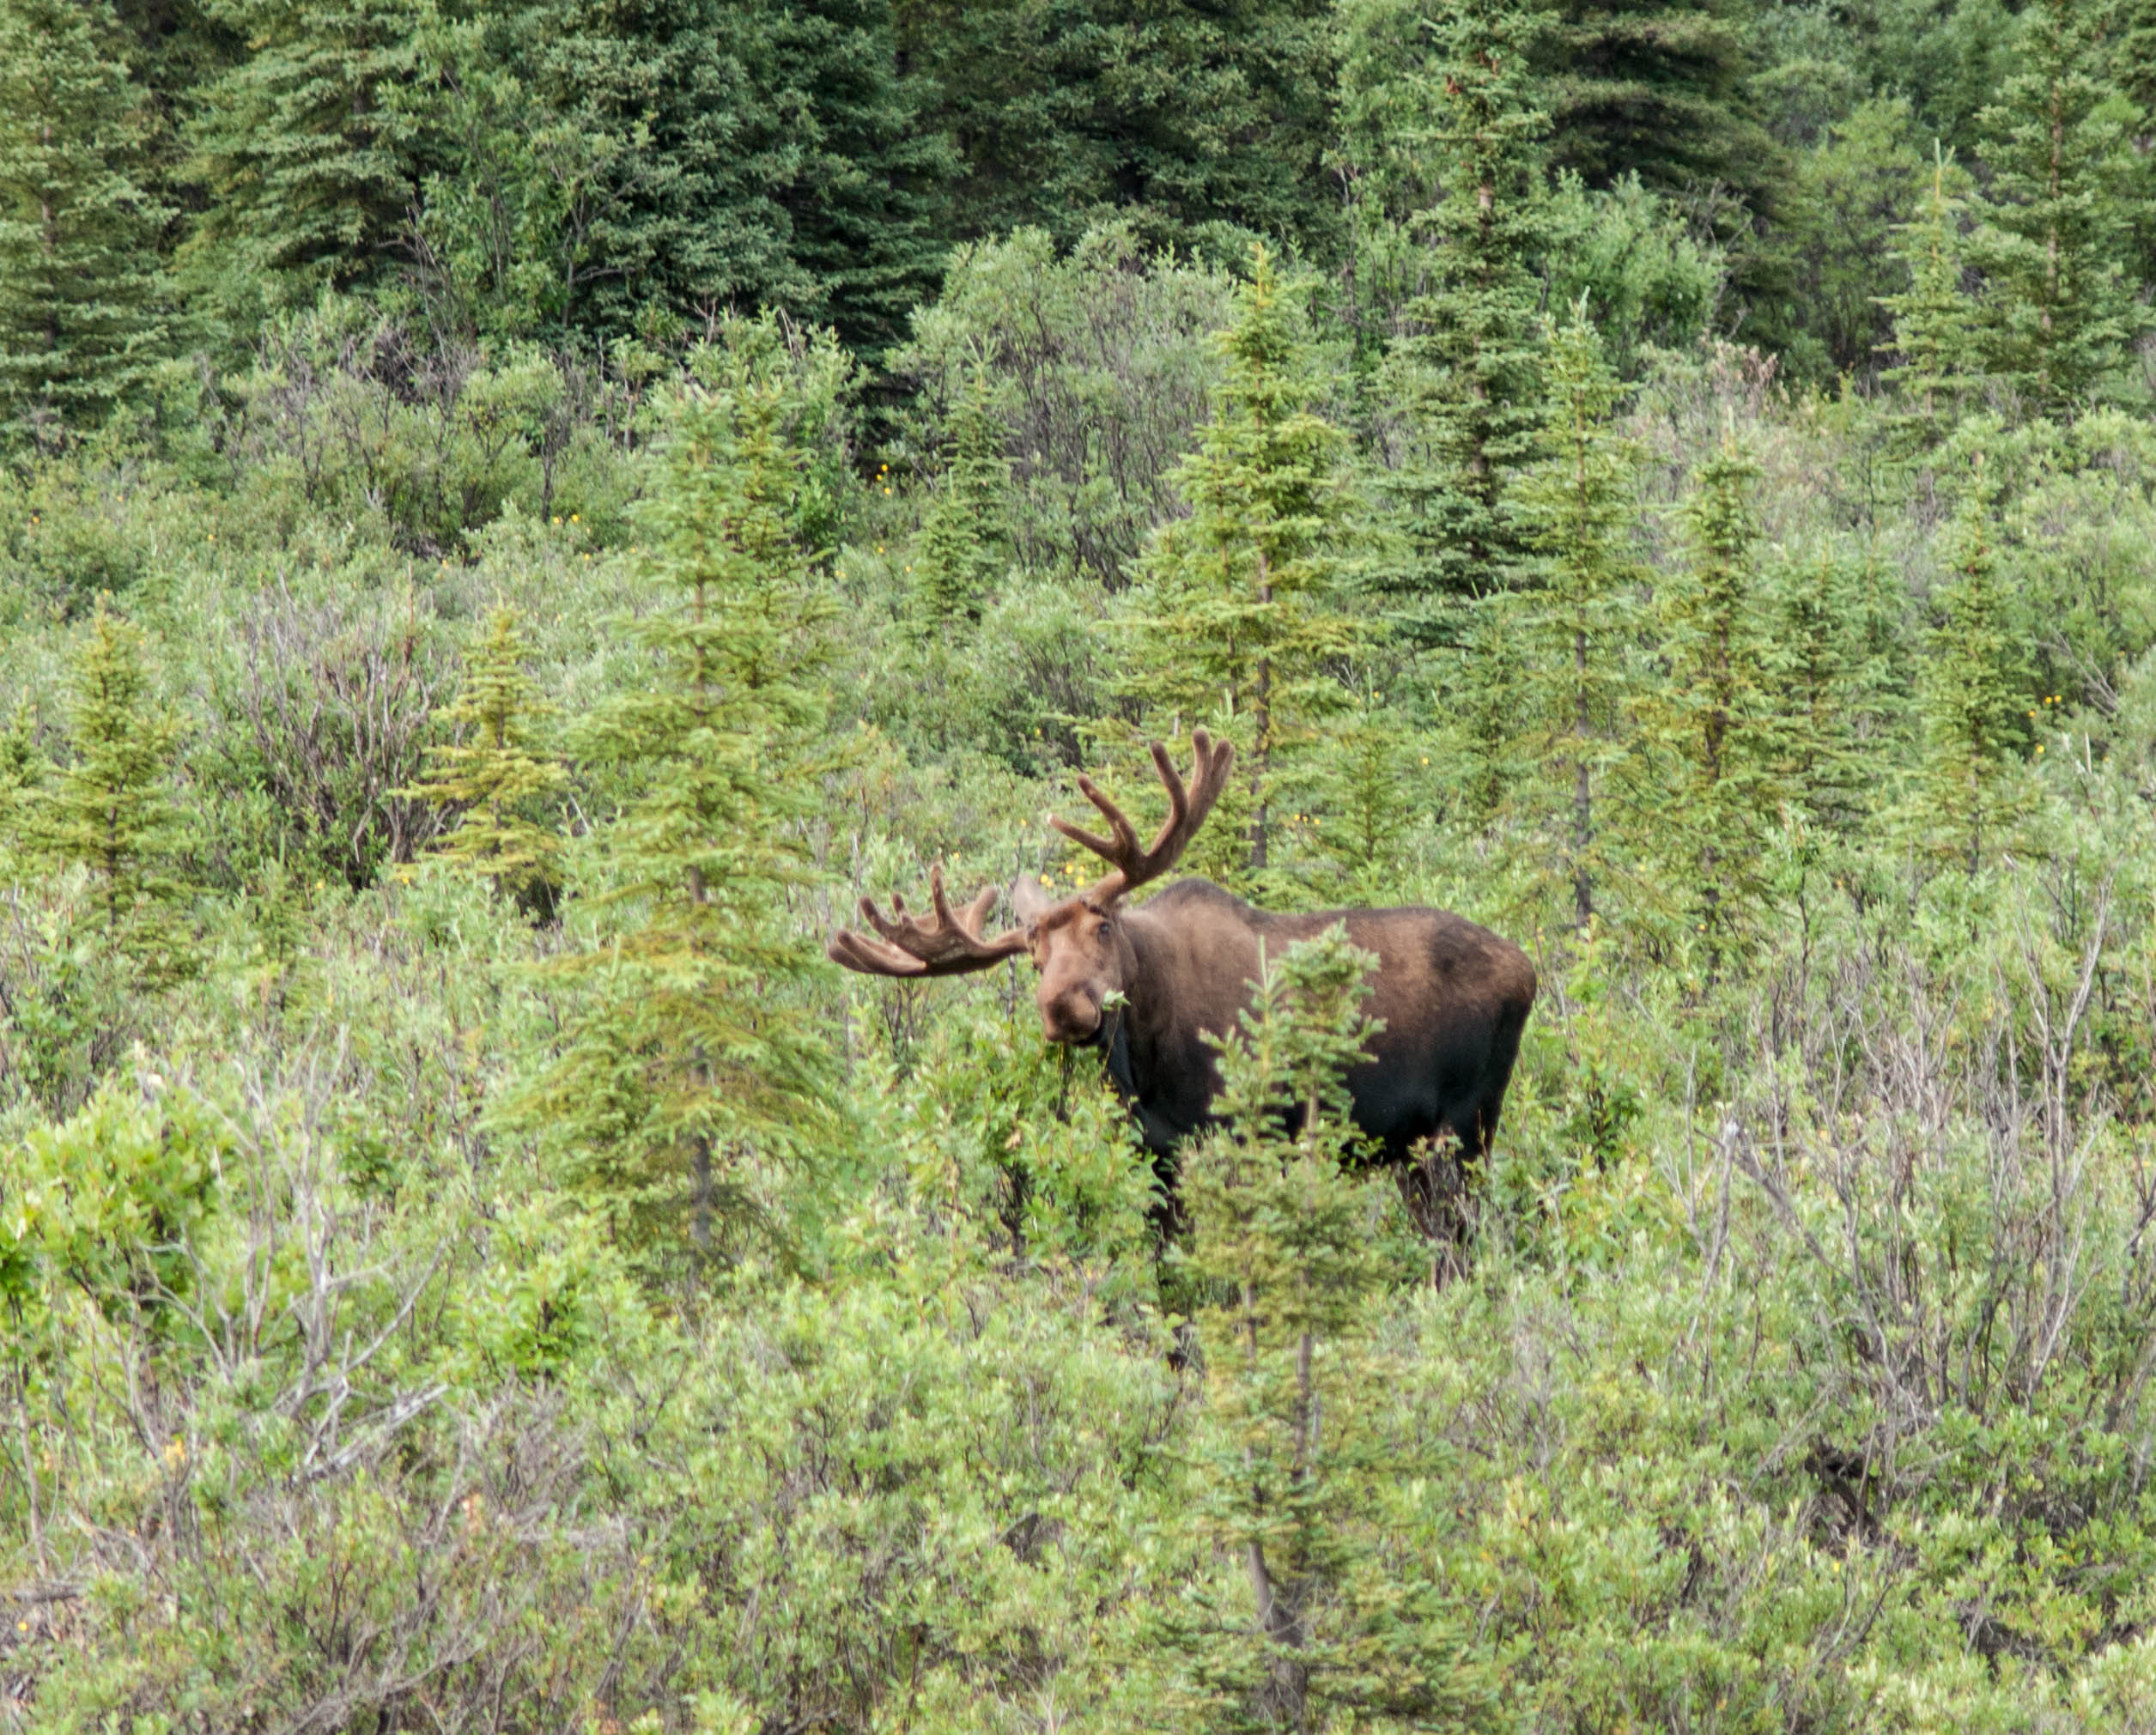 bull moose eating leaves in a forest